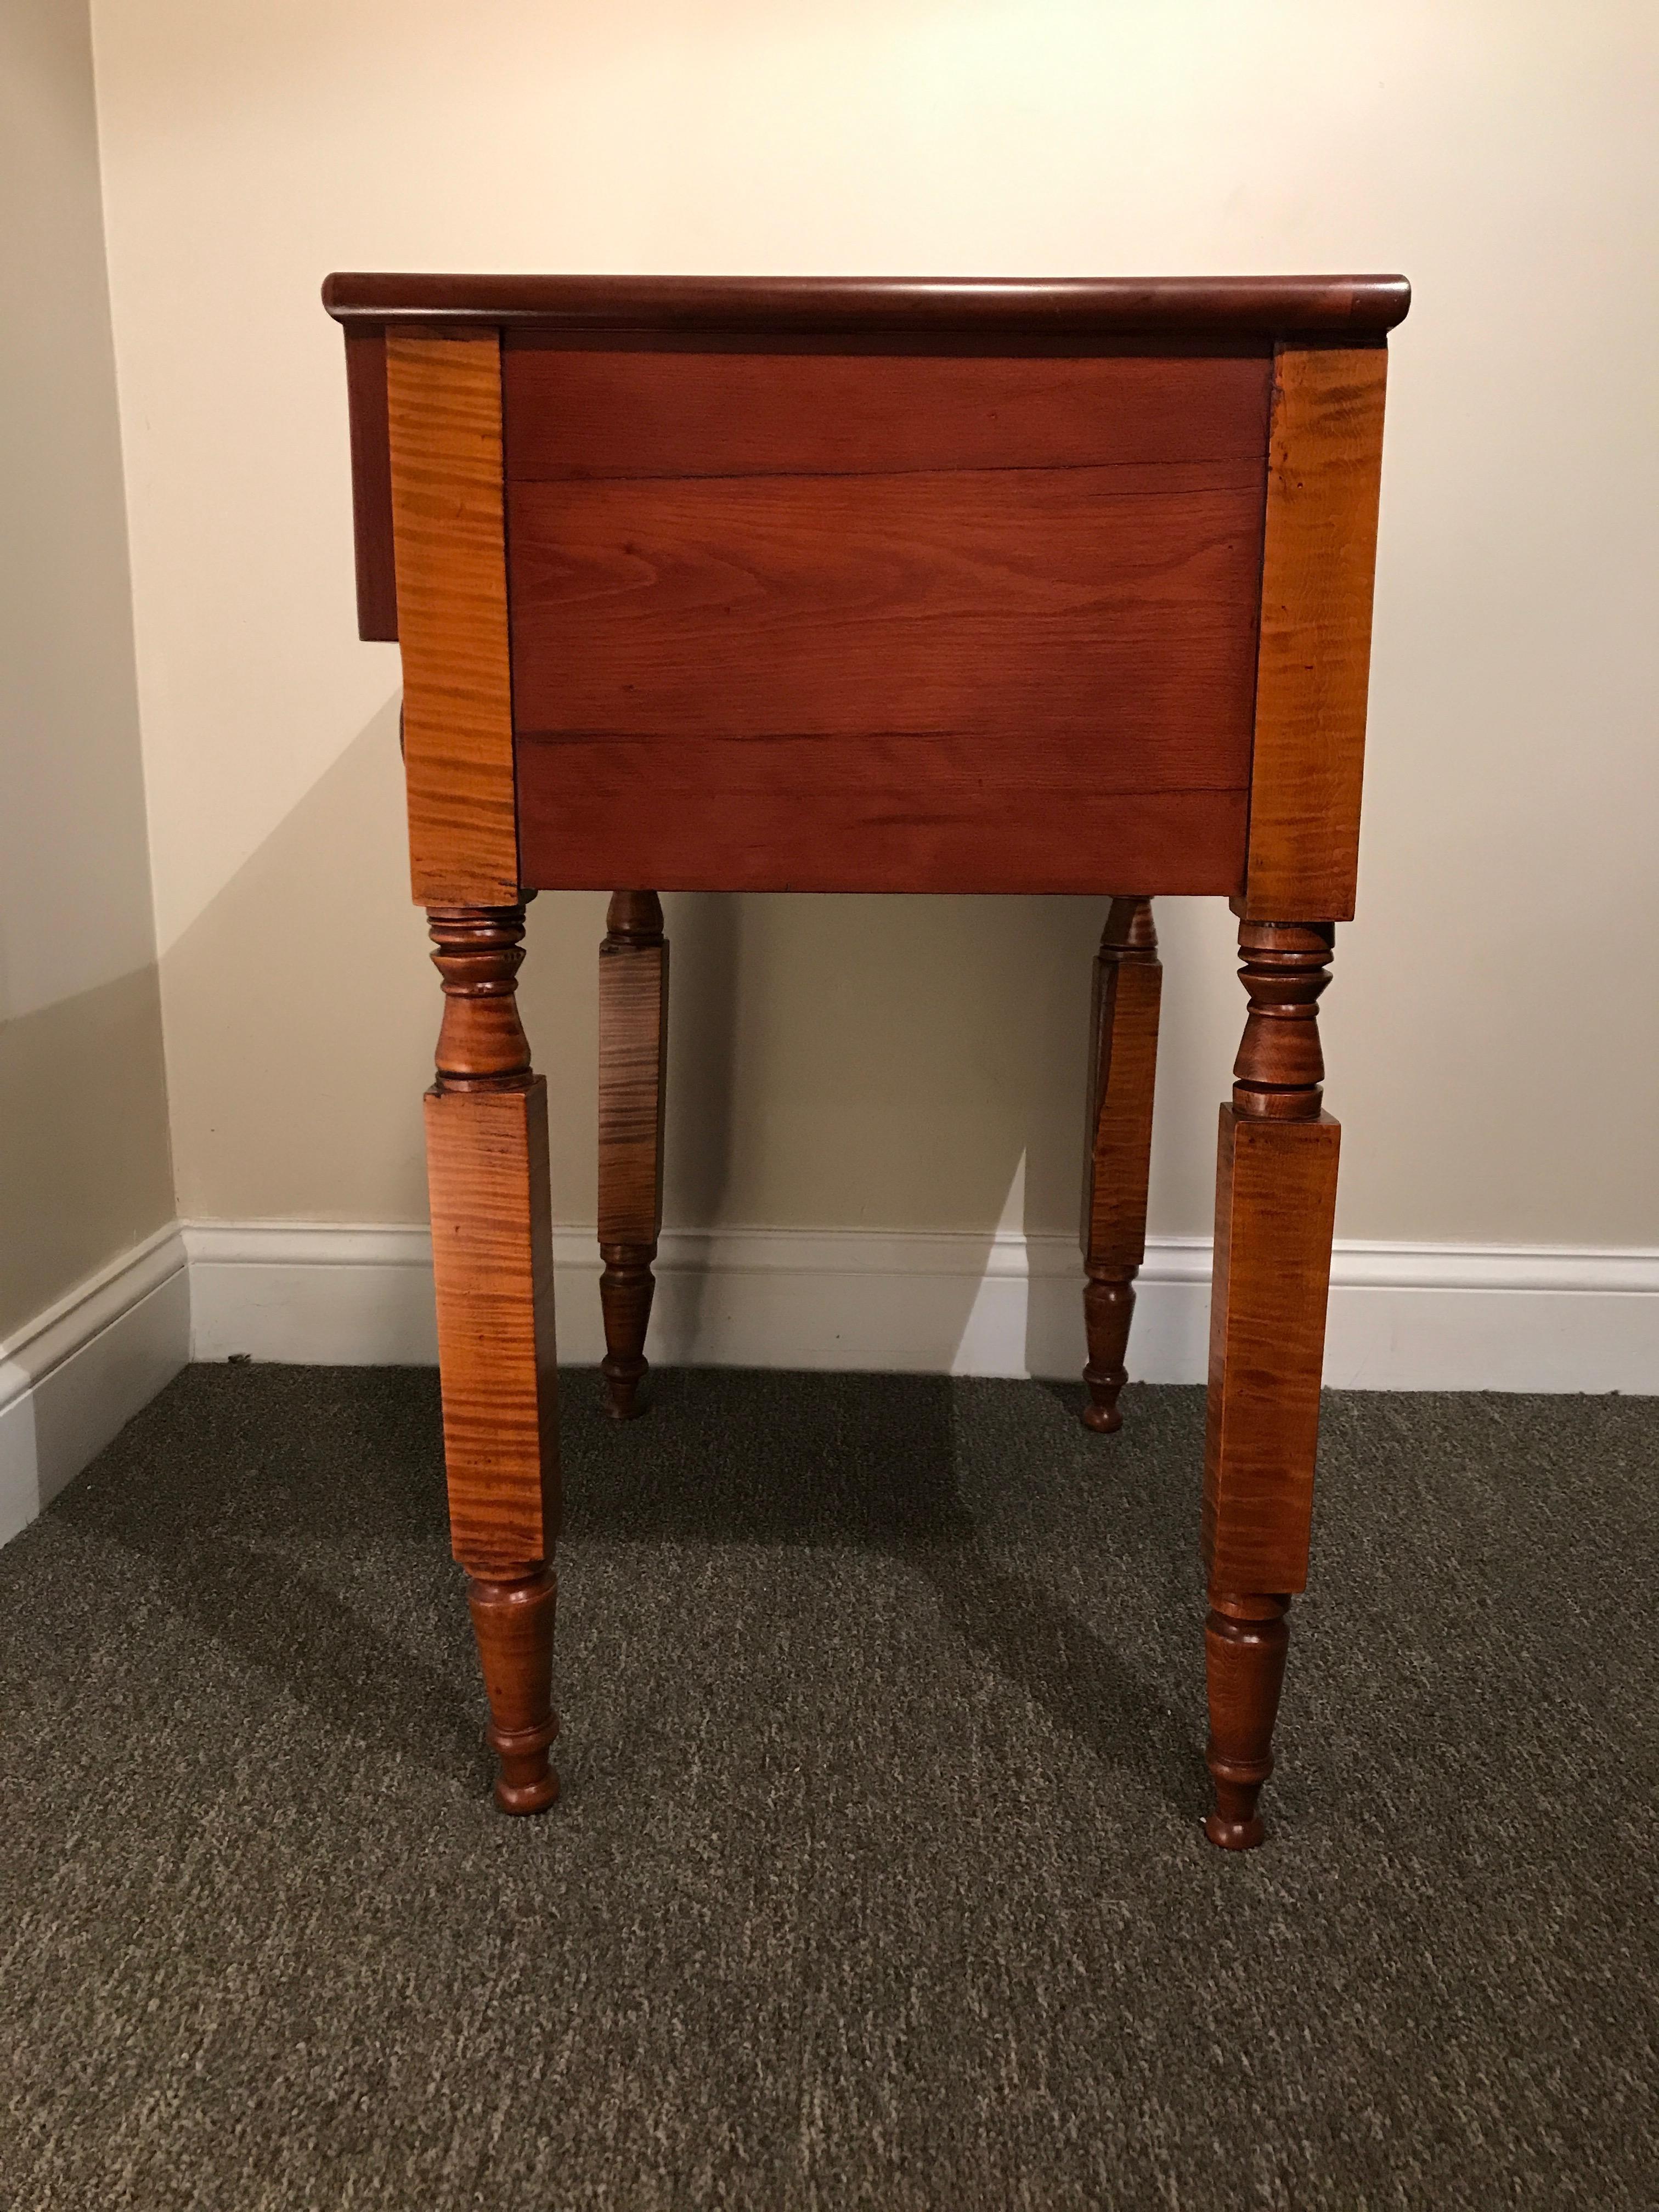 Empire 2-drawer stand in tiger maple, cherry and flamed mahogany, circa 1820. Provenance: Saratoga, NY. Turned legs, dovetailed drawers, top drawer is flamed mahogany, Top front border is veneered with flames mahogany as well, wooden knobs. This